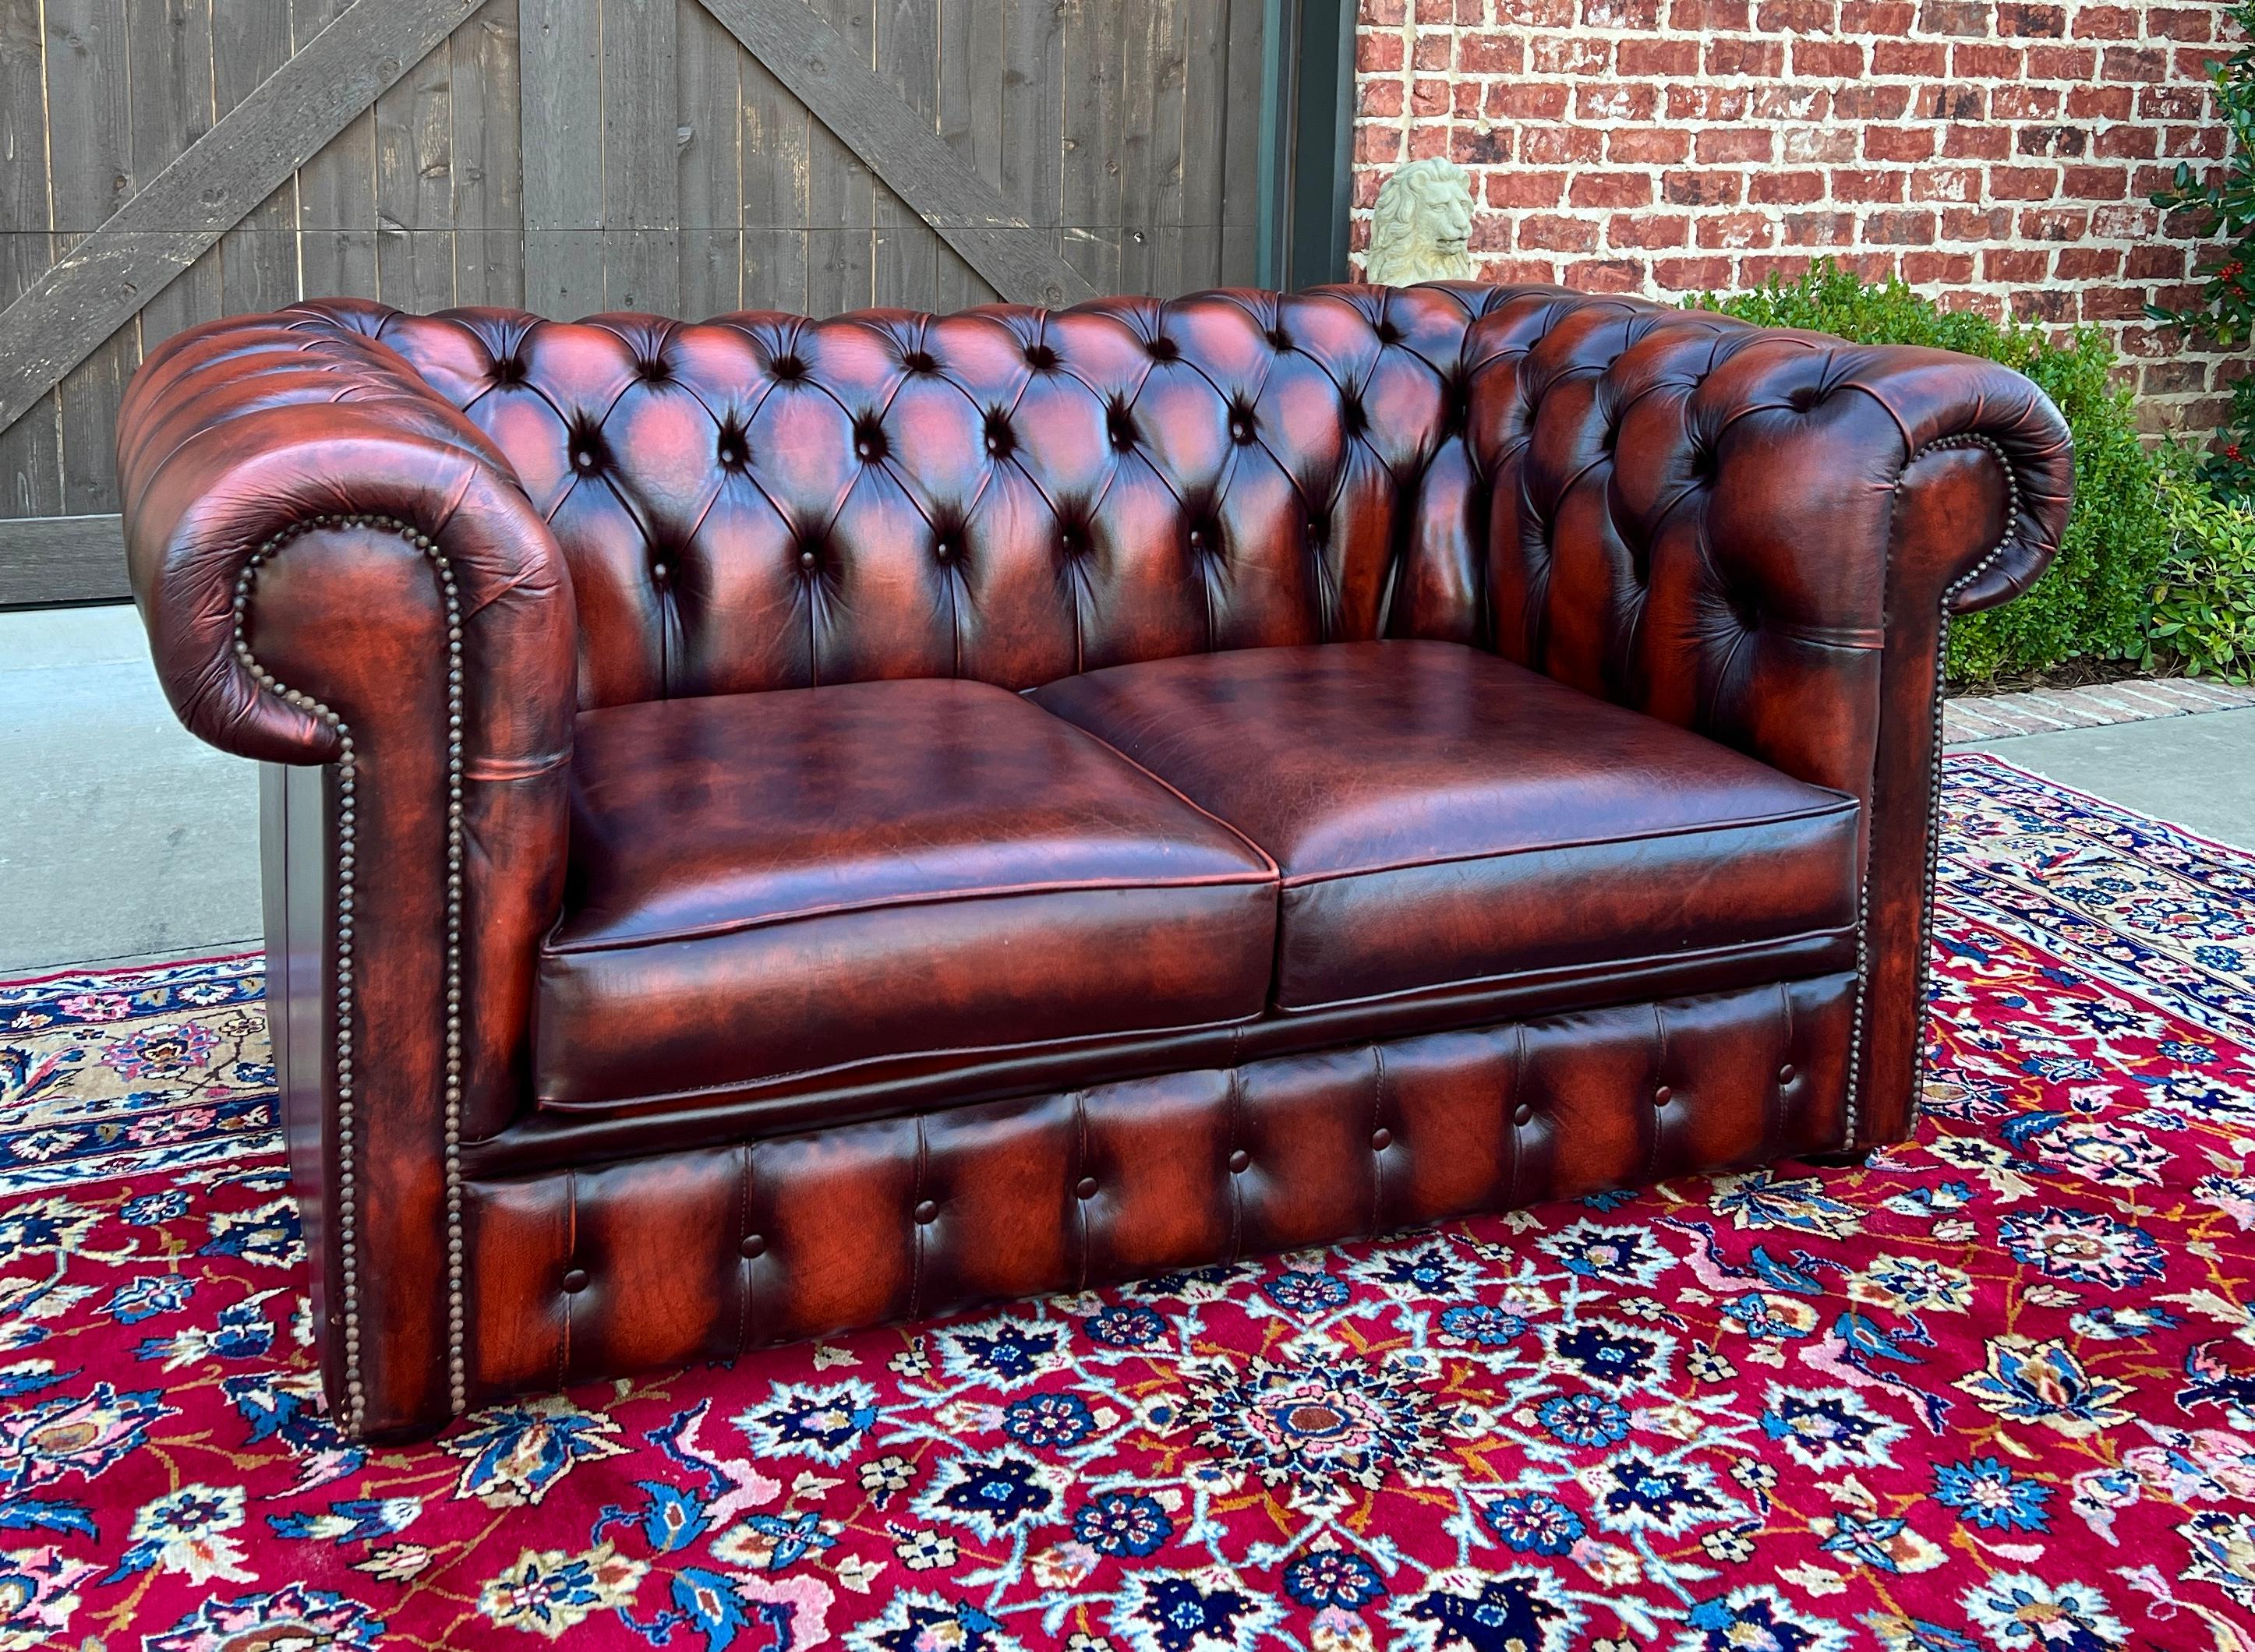 Vintage English Chesterfield Leather Tufted Love Seat Sofa Oxblood Red #2 In Good Condition For Sale In Tyler, TX